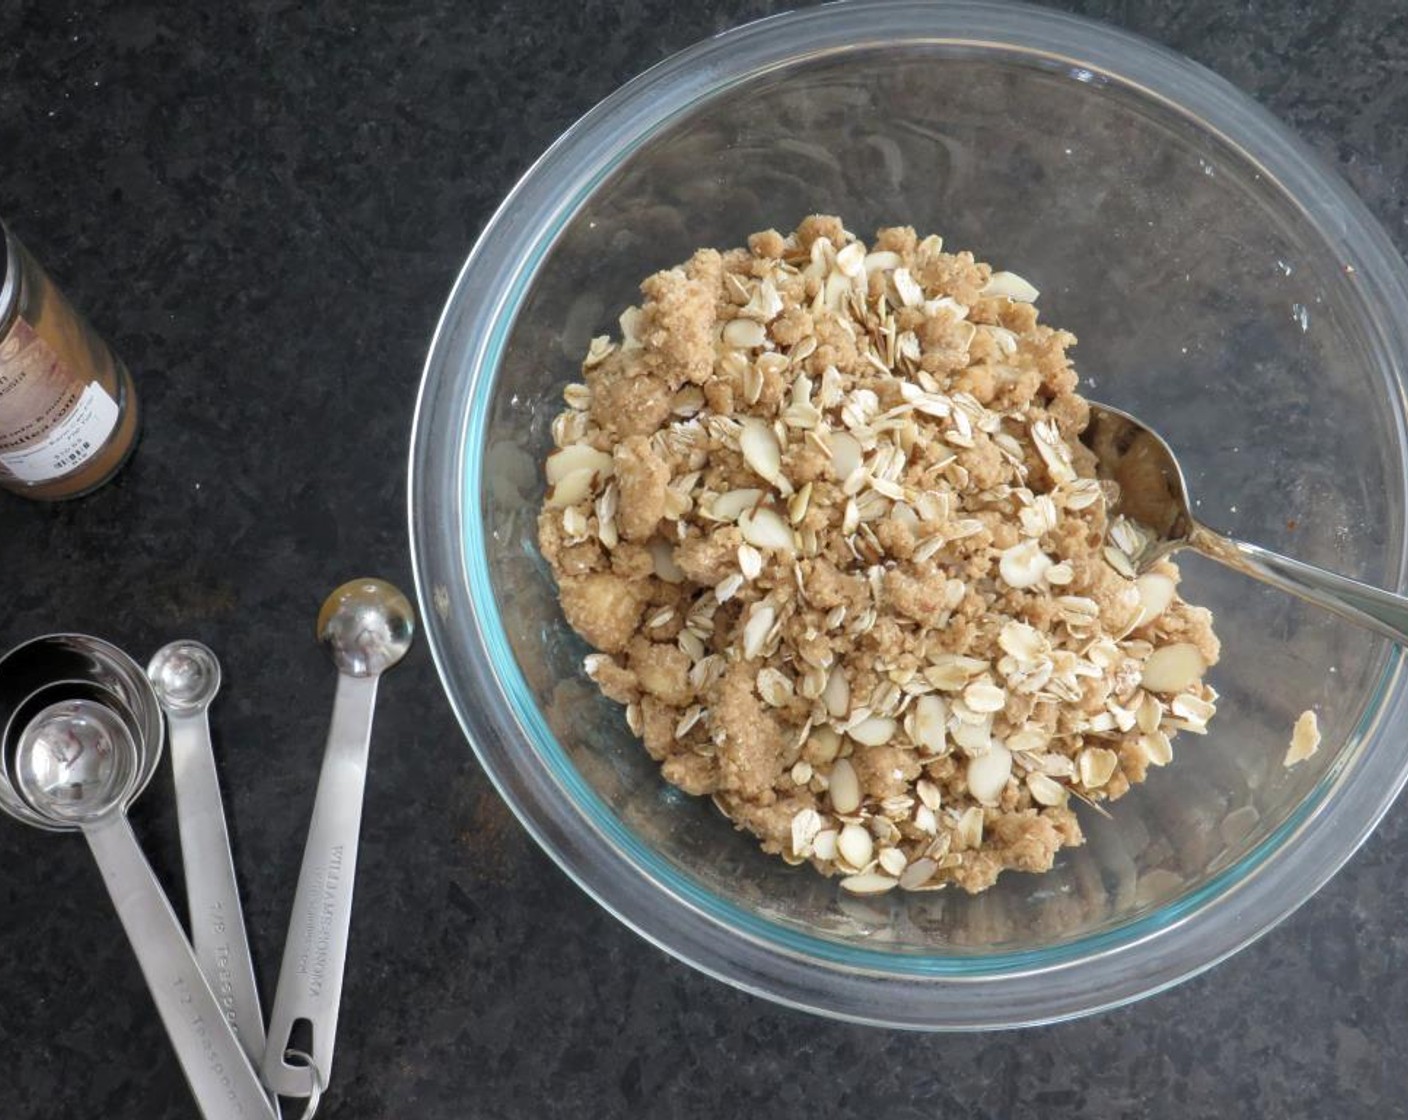 step 5 With your fingers, rub the butter into the flour mixture, working until it resembles wet sand. Add Oatmeal (1/2 cup) and Sliced Almonds (1/4 cup). Toss to combine. Transfer fruit mixture to an 8x8 ceramic baking dish.